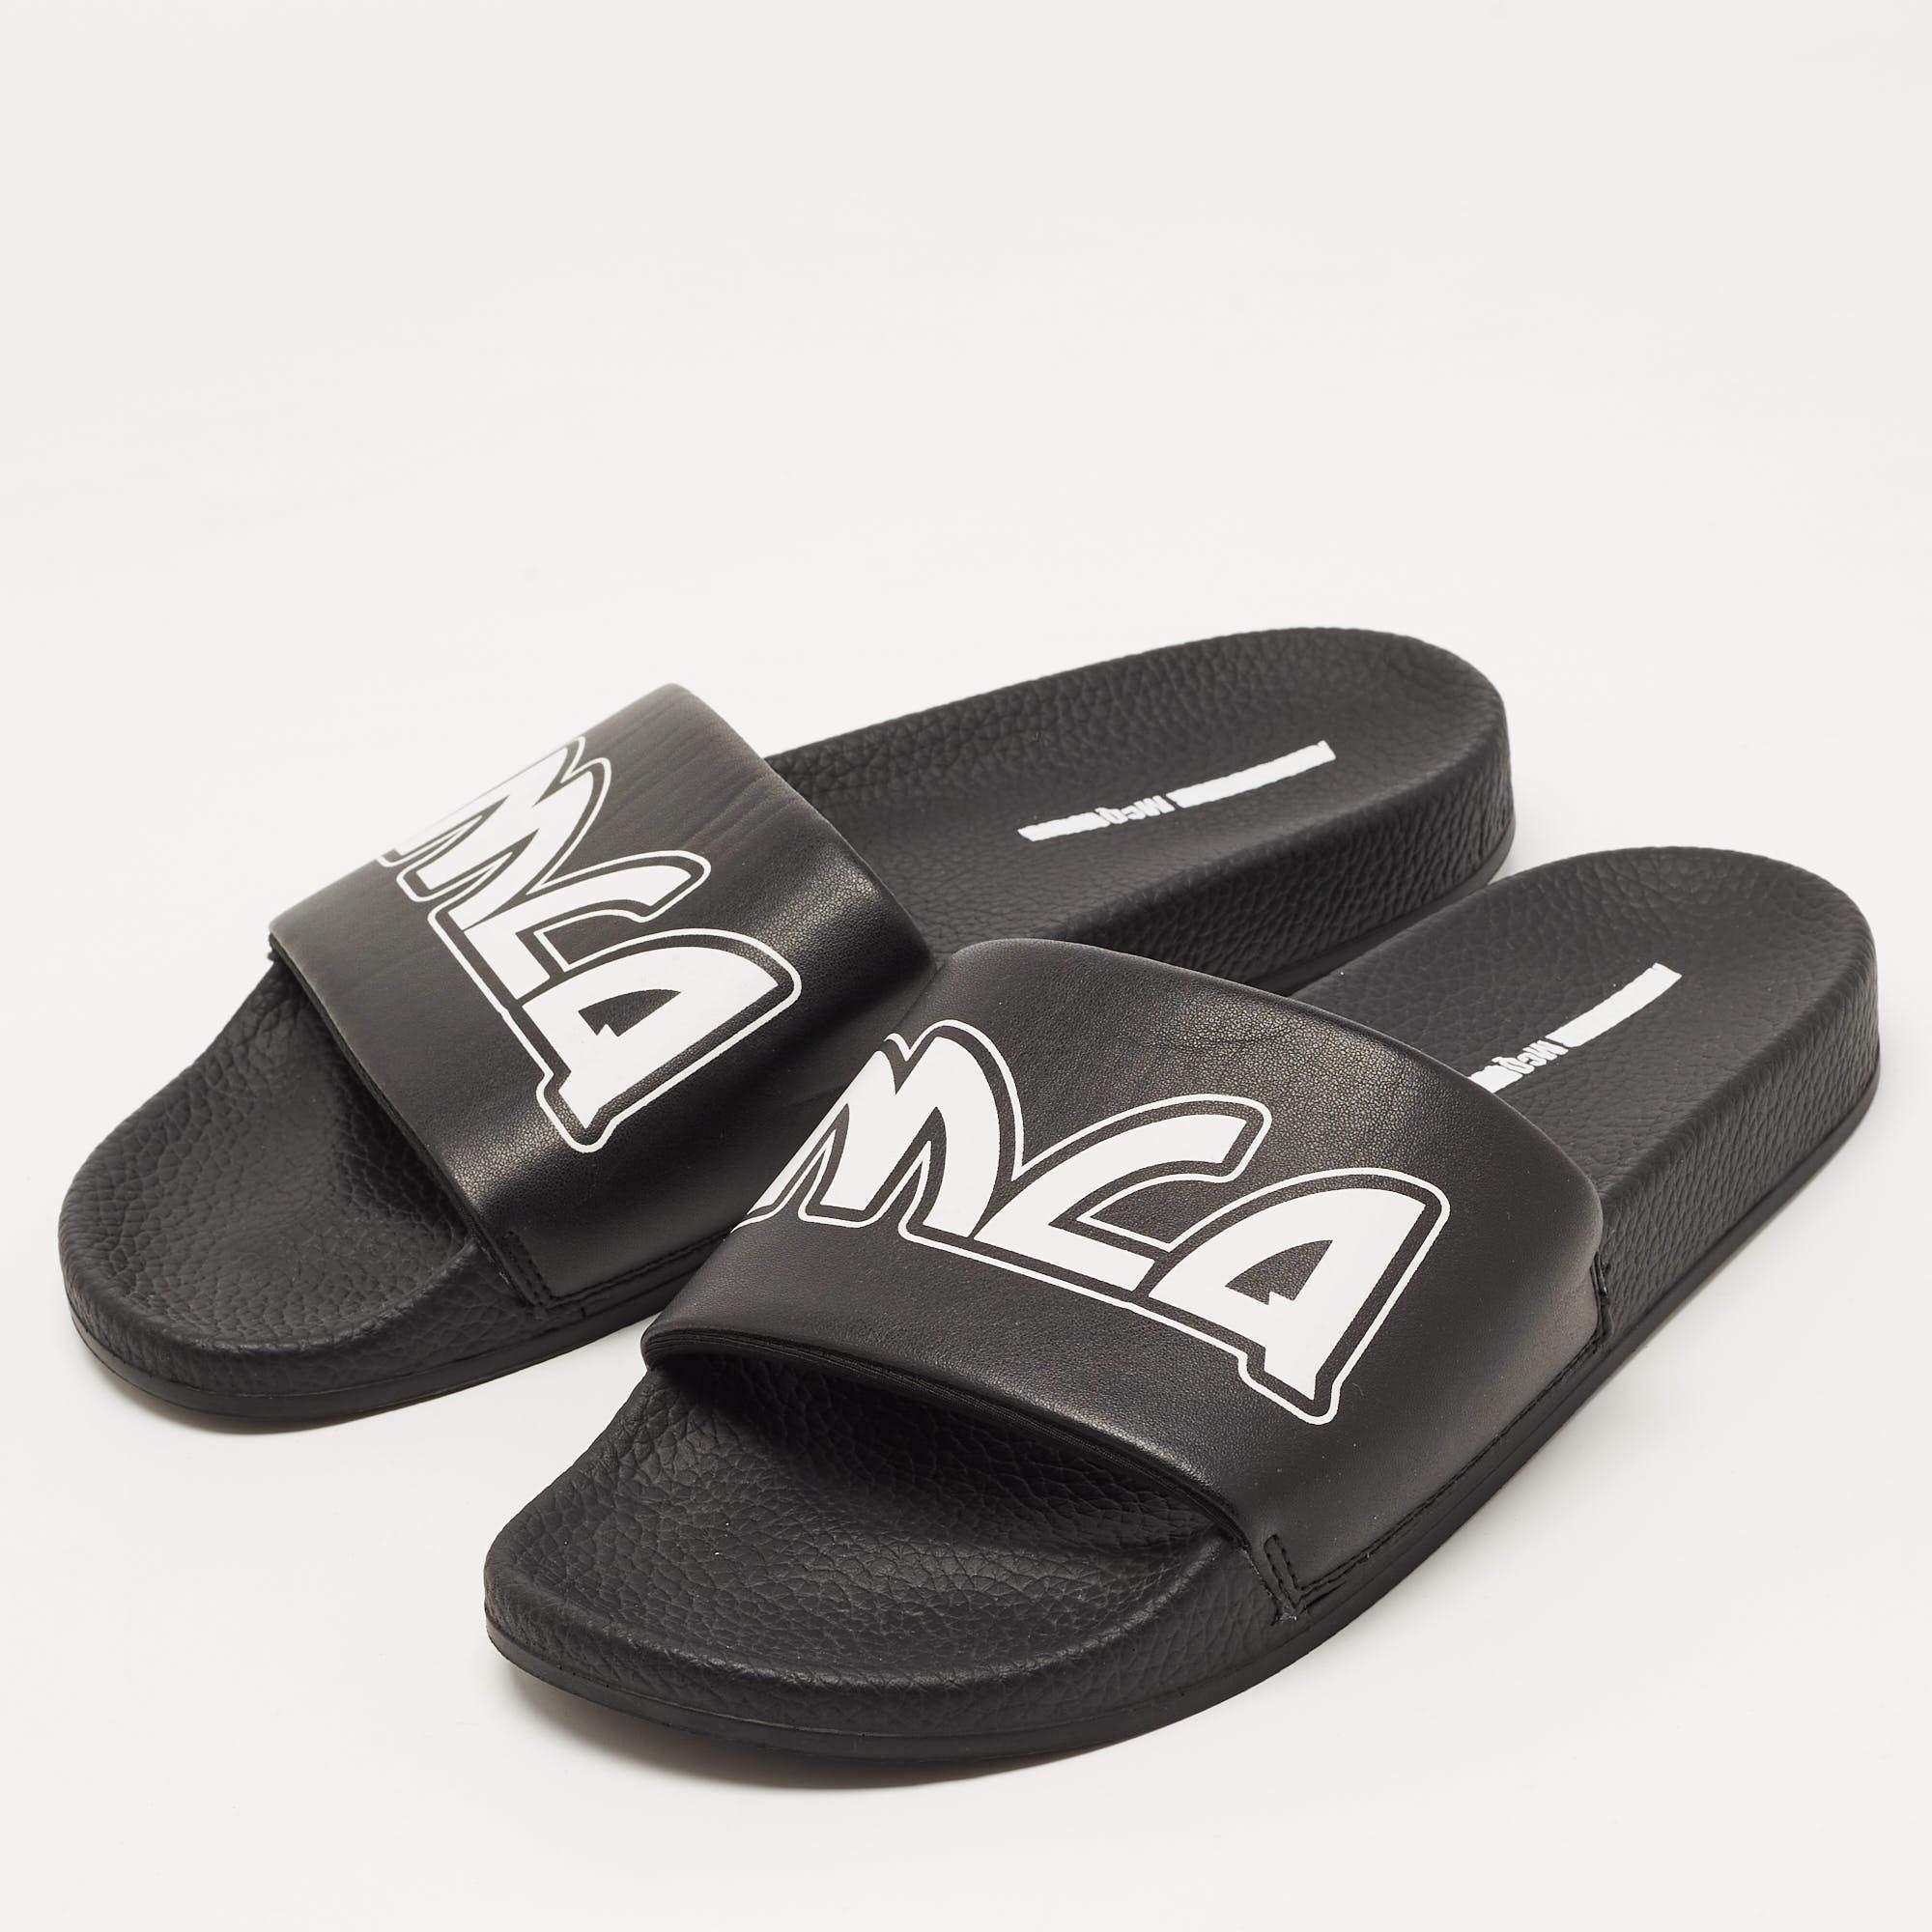 McQ by Alexander McQueen Black Faux Leather Logo Slides Size 42 4